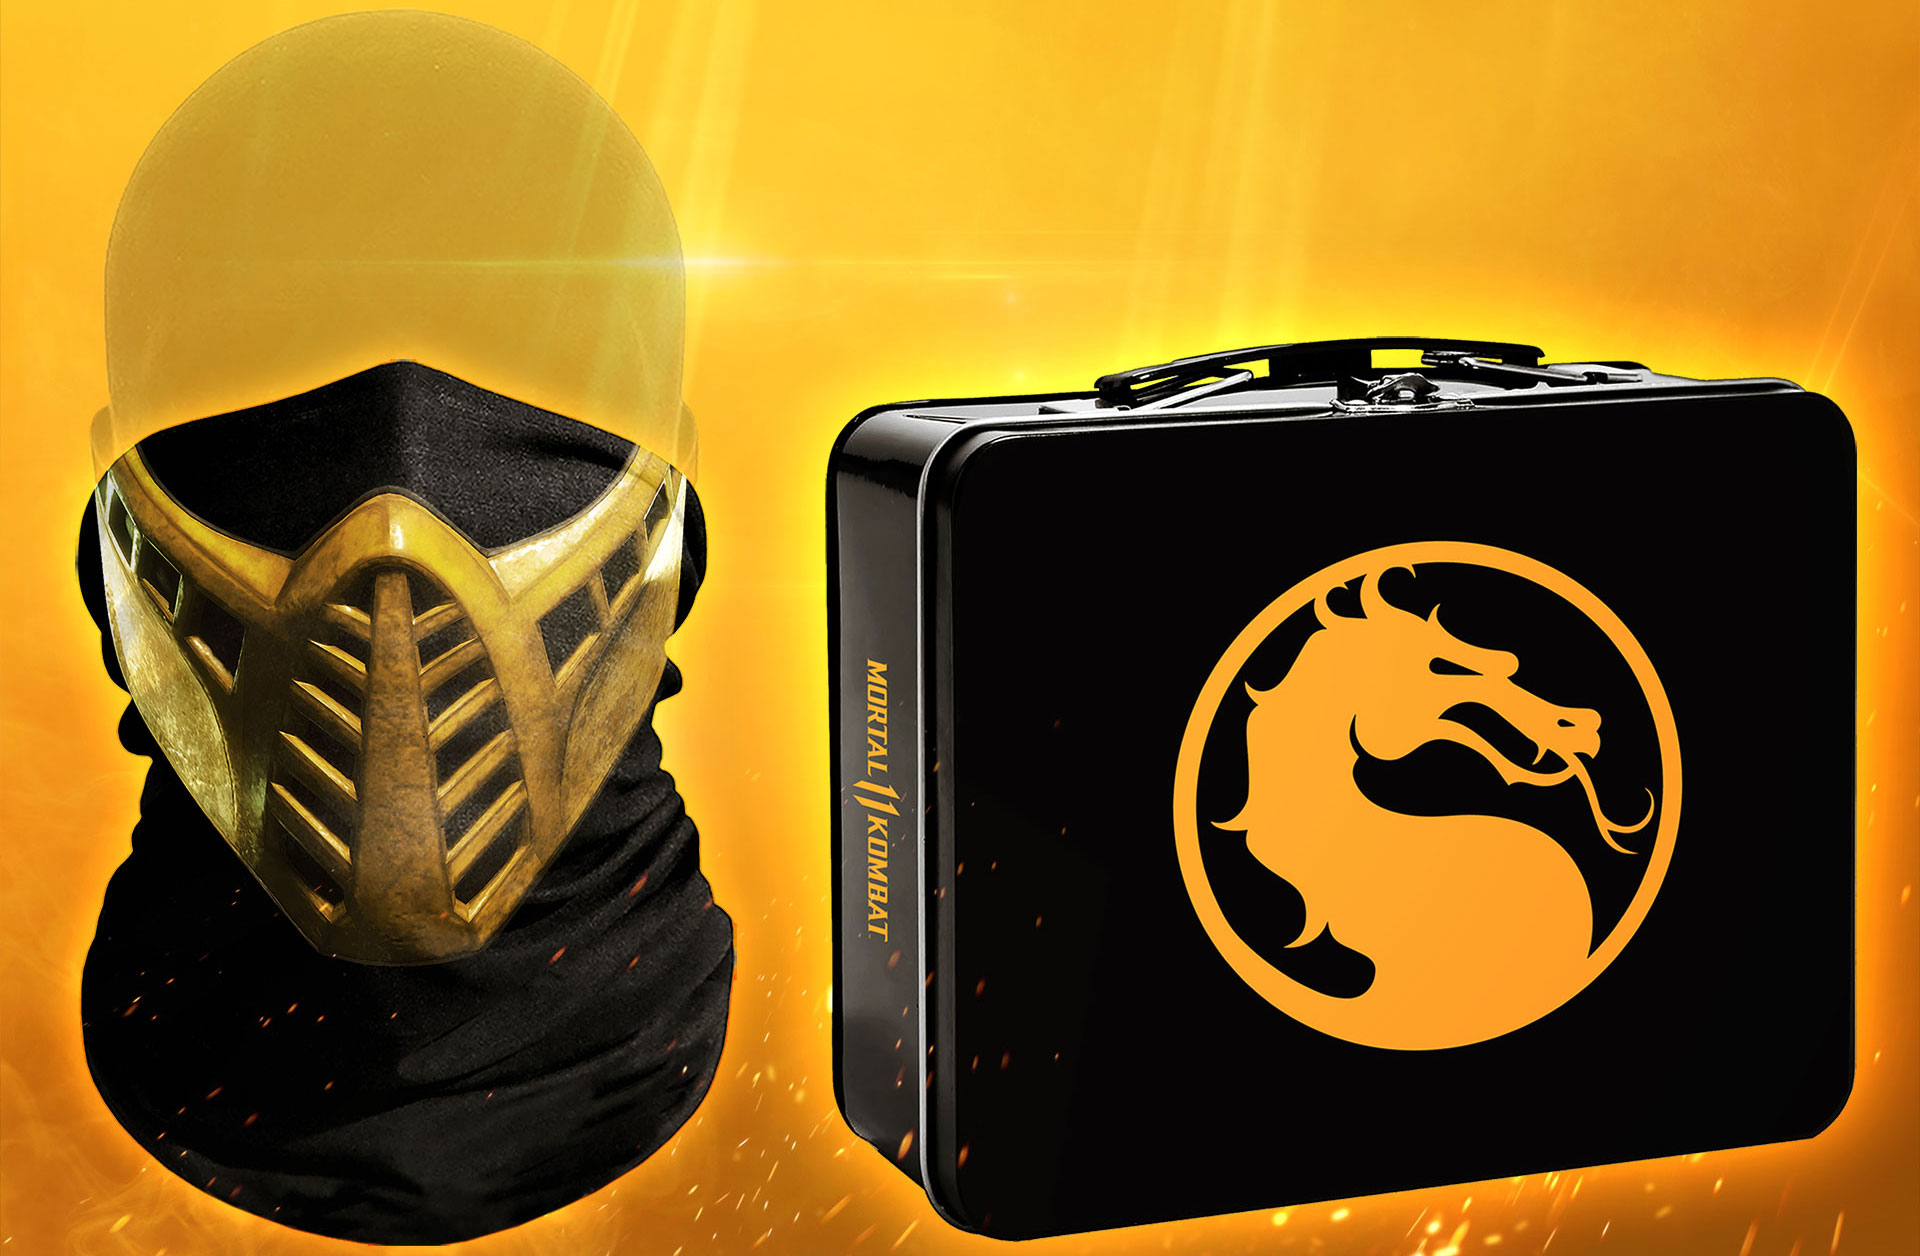 New World Group Scorpion Face mask and custom metal lunchbox for video game promo